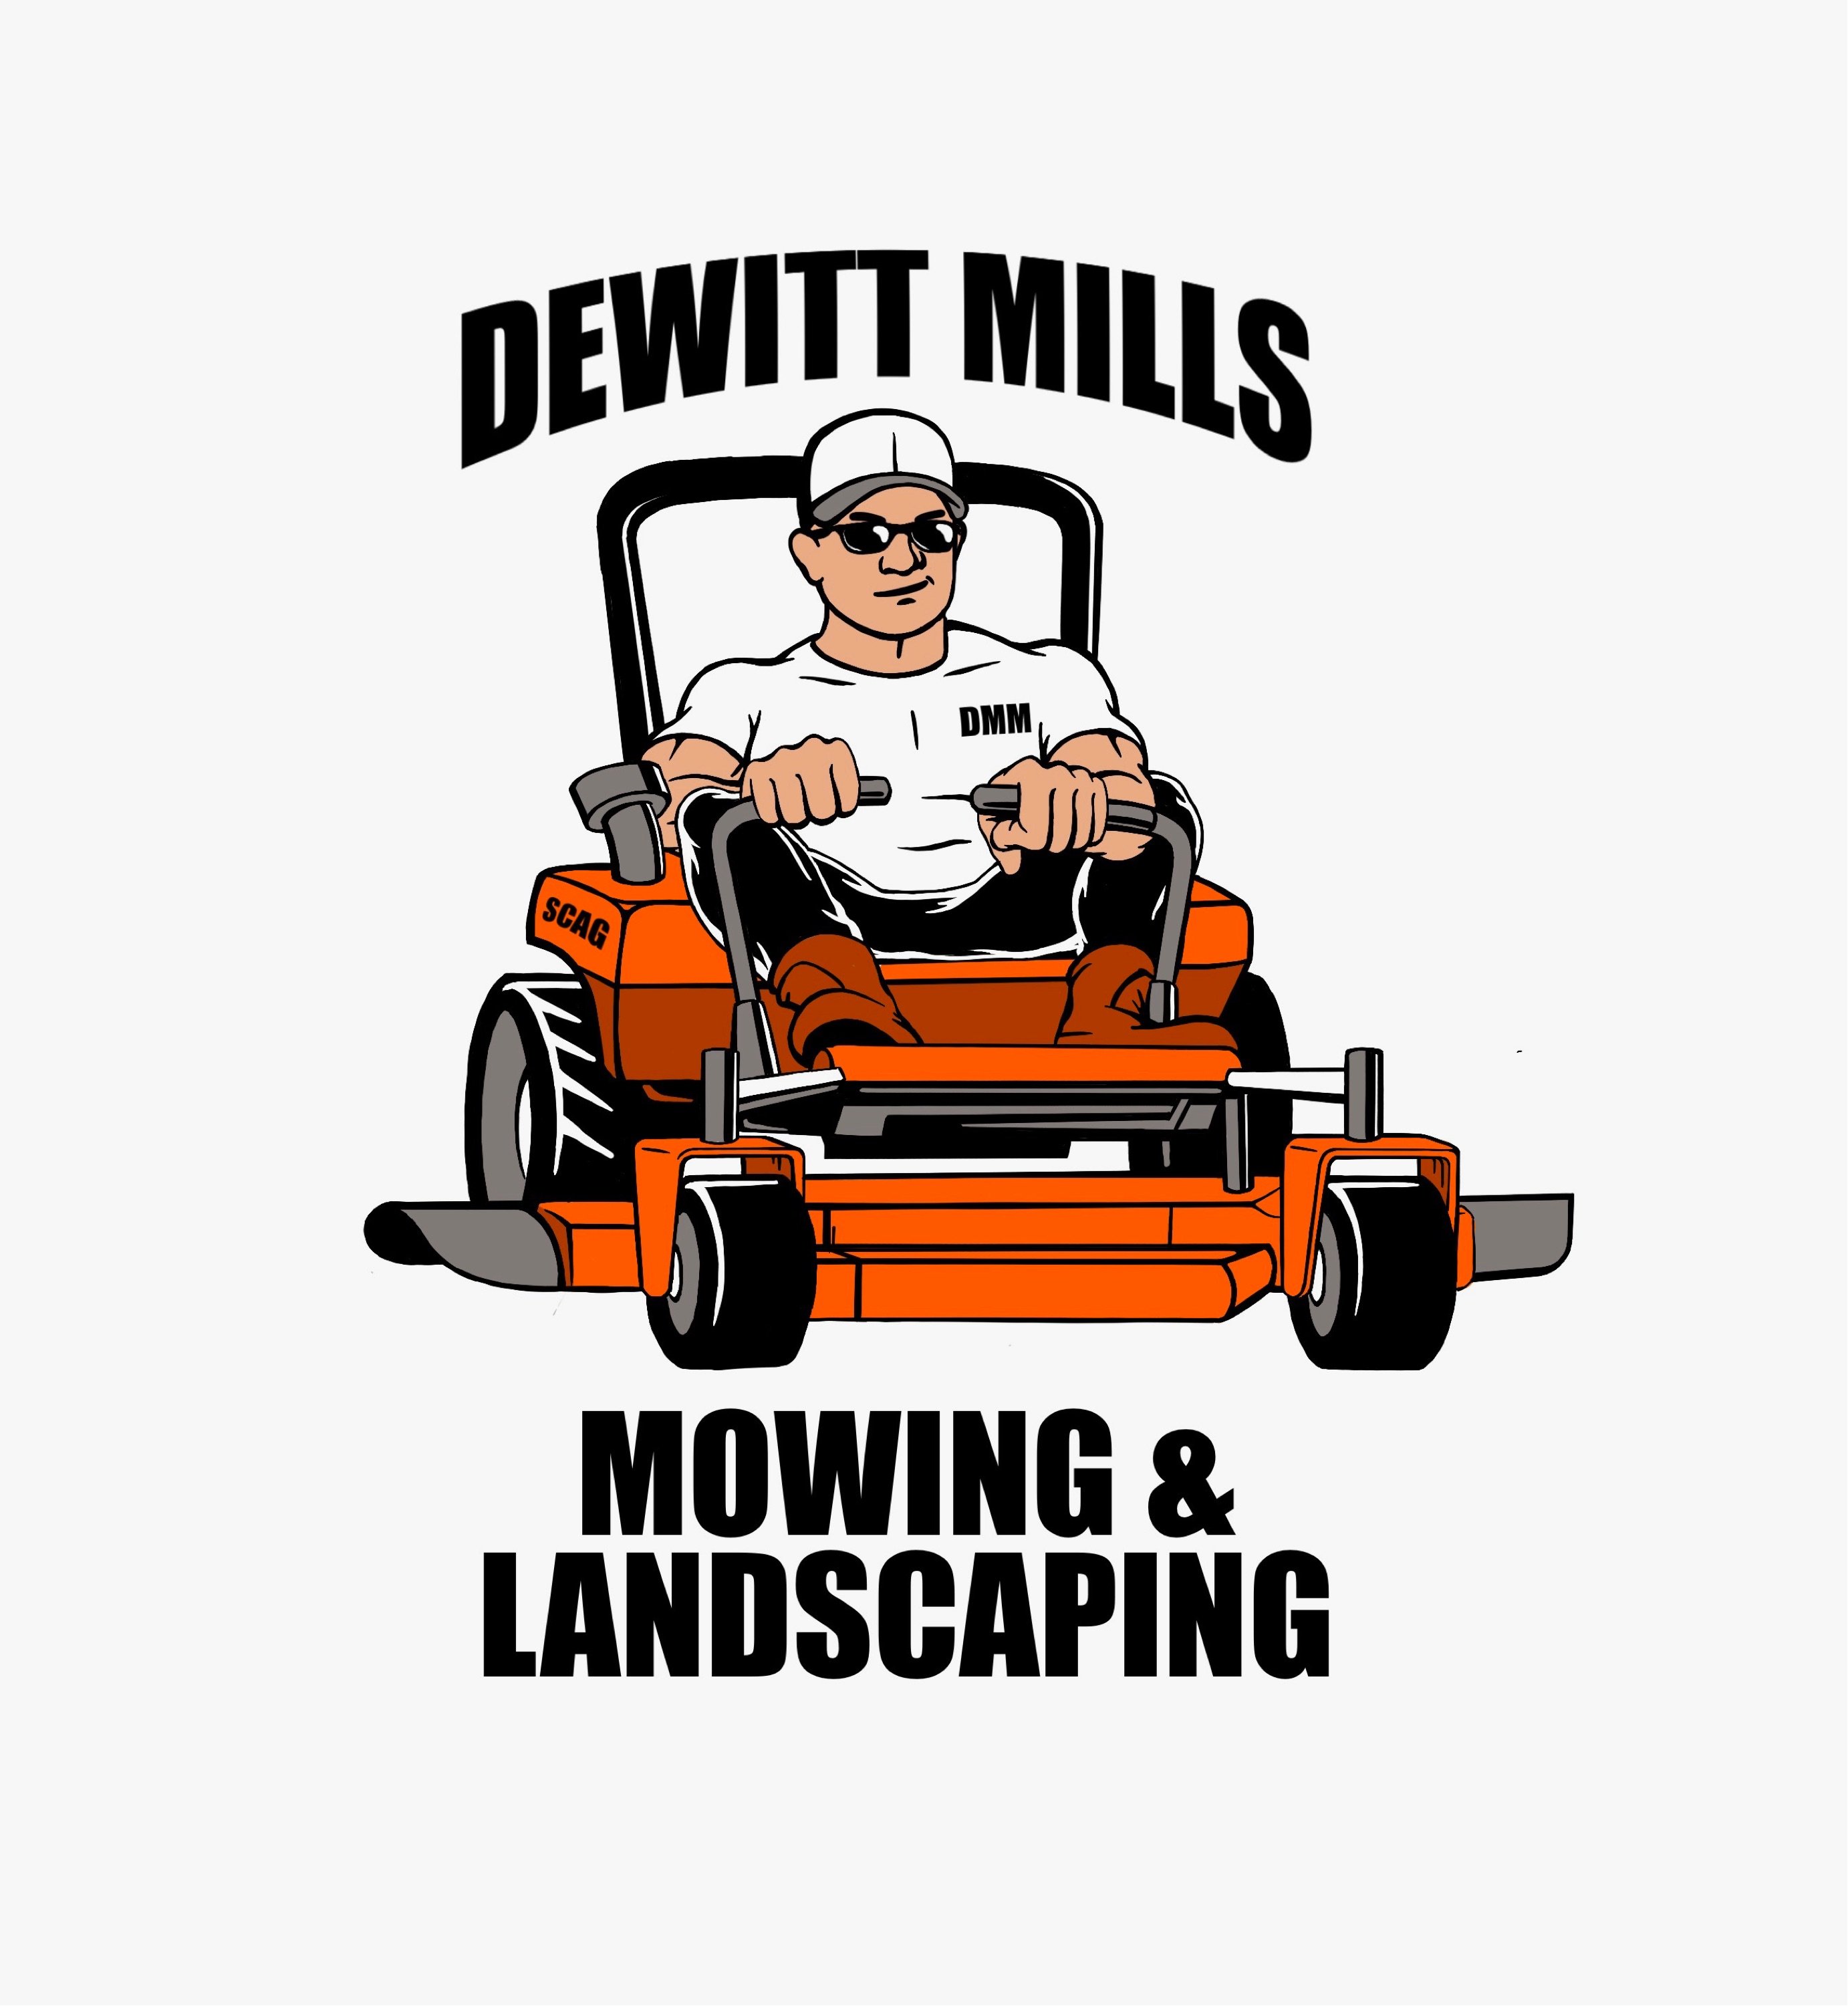 Dewitt Mills Mowing and Landscaping Logo